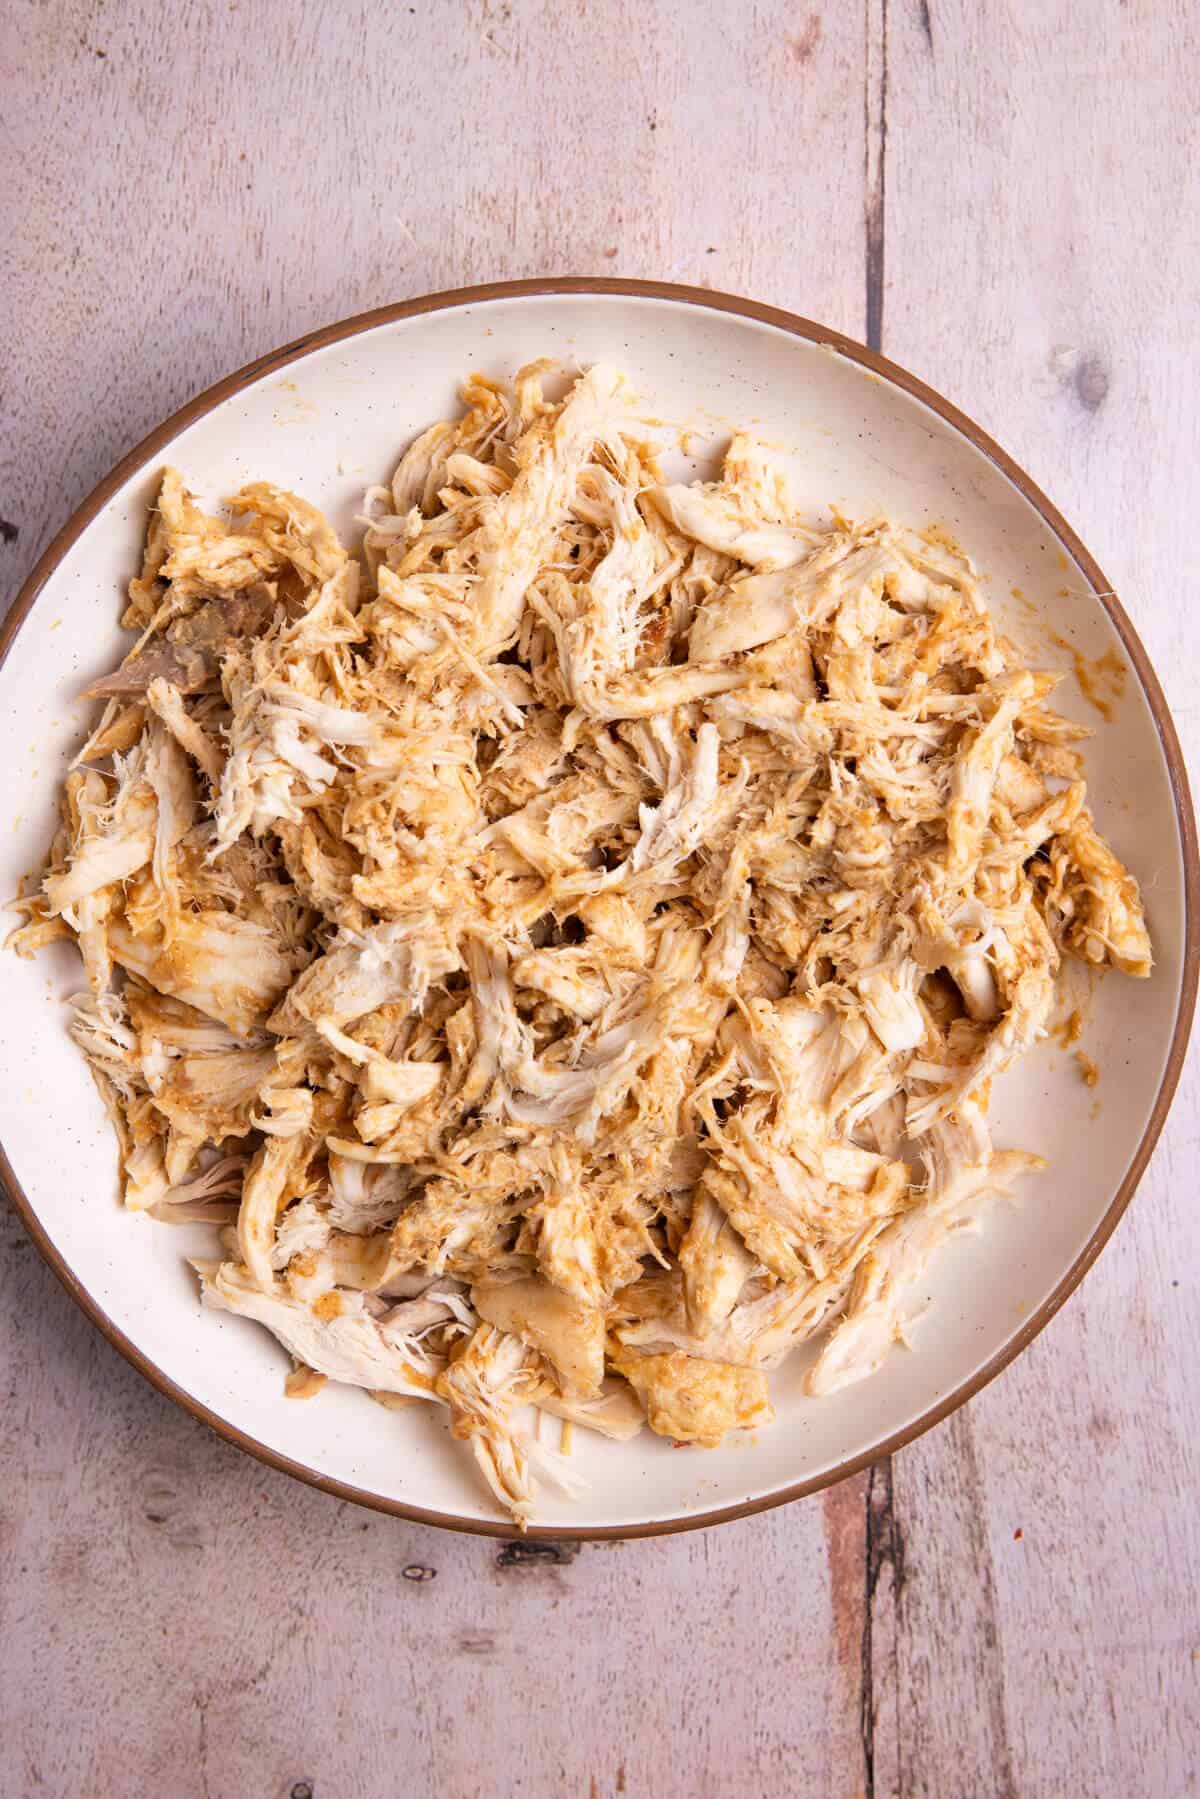 A plate of shredded chicken tossed in peanut sauce.